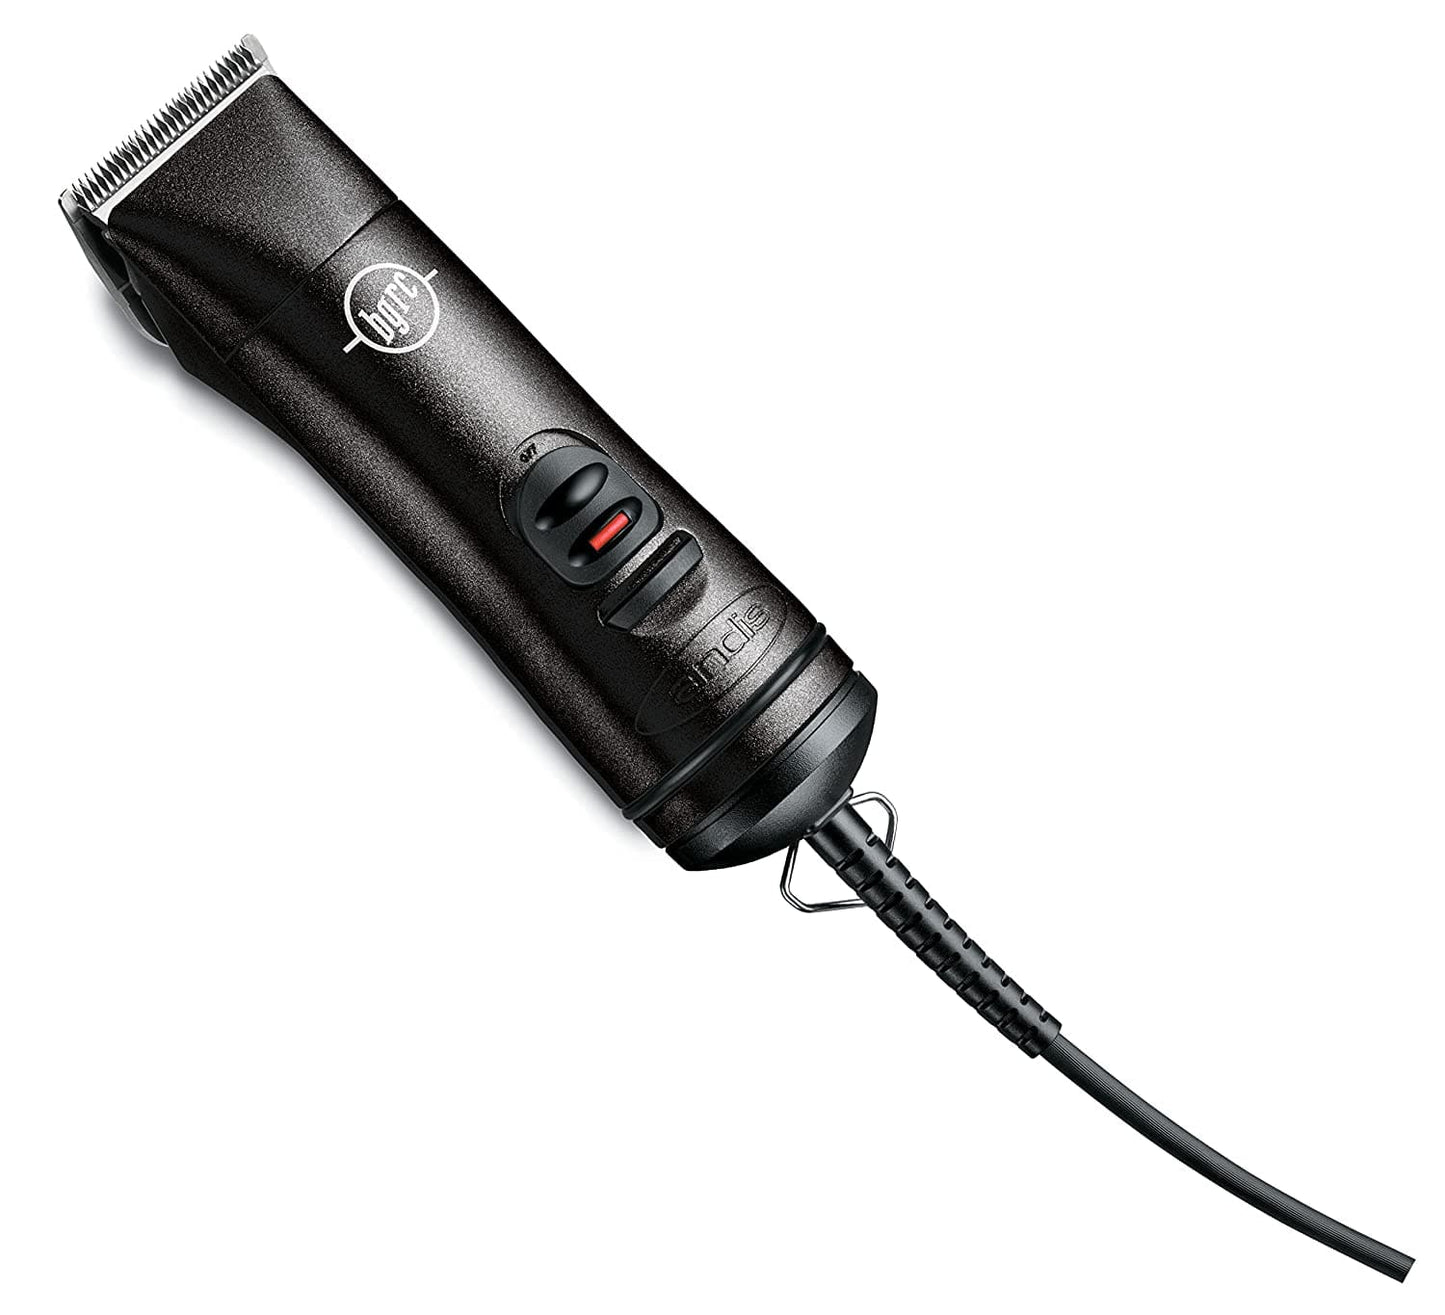 Andis UltraEdge BGRC Hair Clipper with Detachable Blade #63700 - Goldy TV